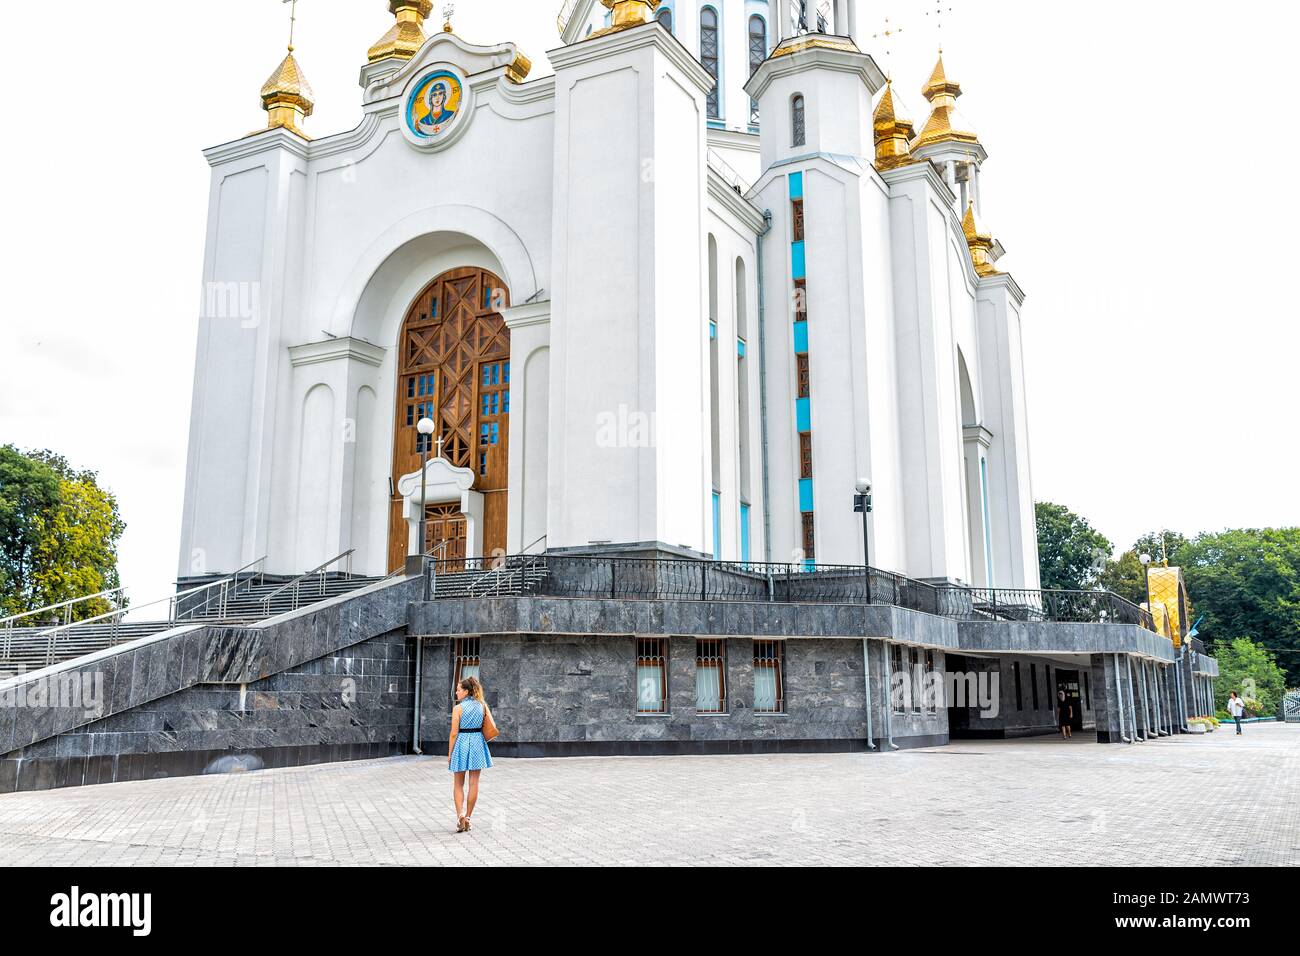 Rivne, Ukraine - July 3, 2018: Soborna Lypnya street in Rovno city in Ukraine in summer and woman people by St Basil Cathedral UOC-KP Stock Photo